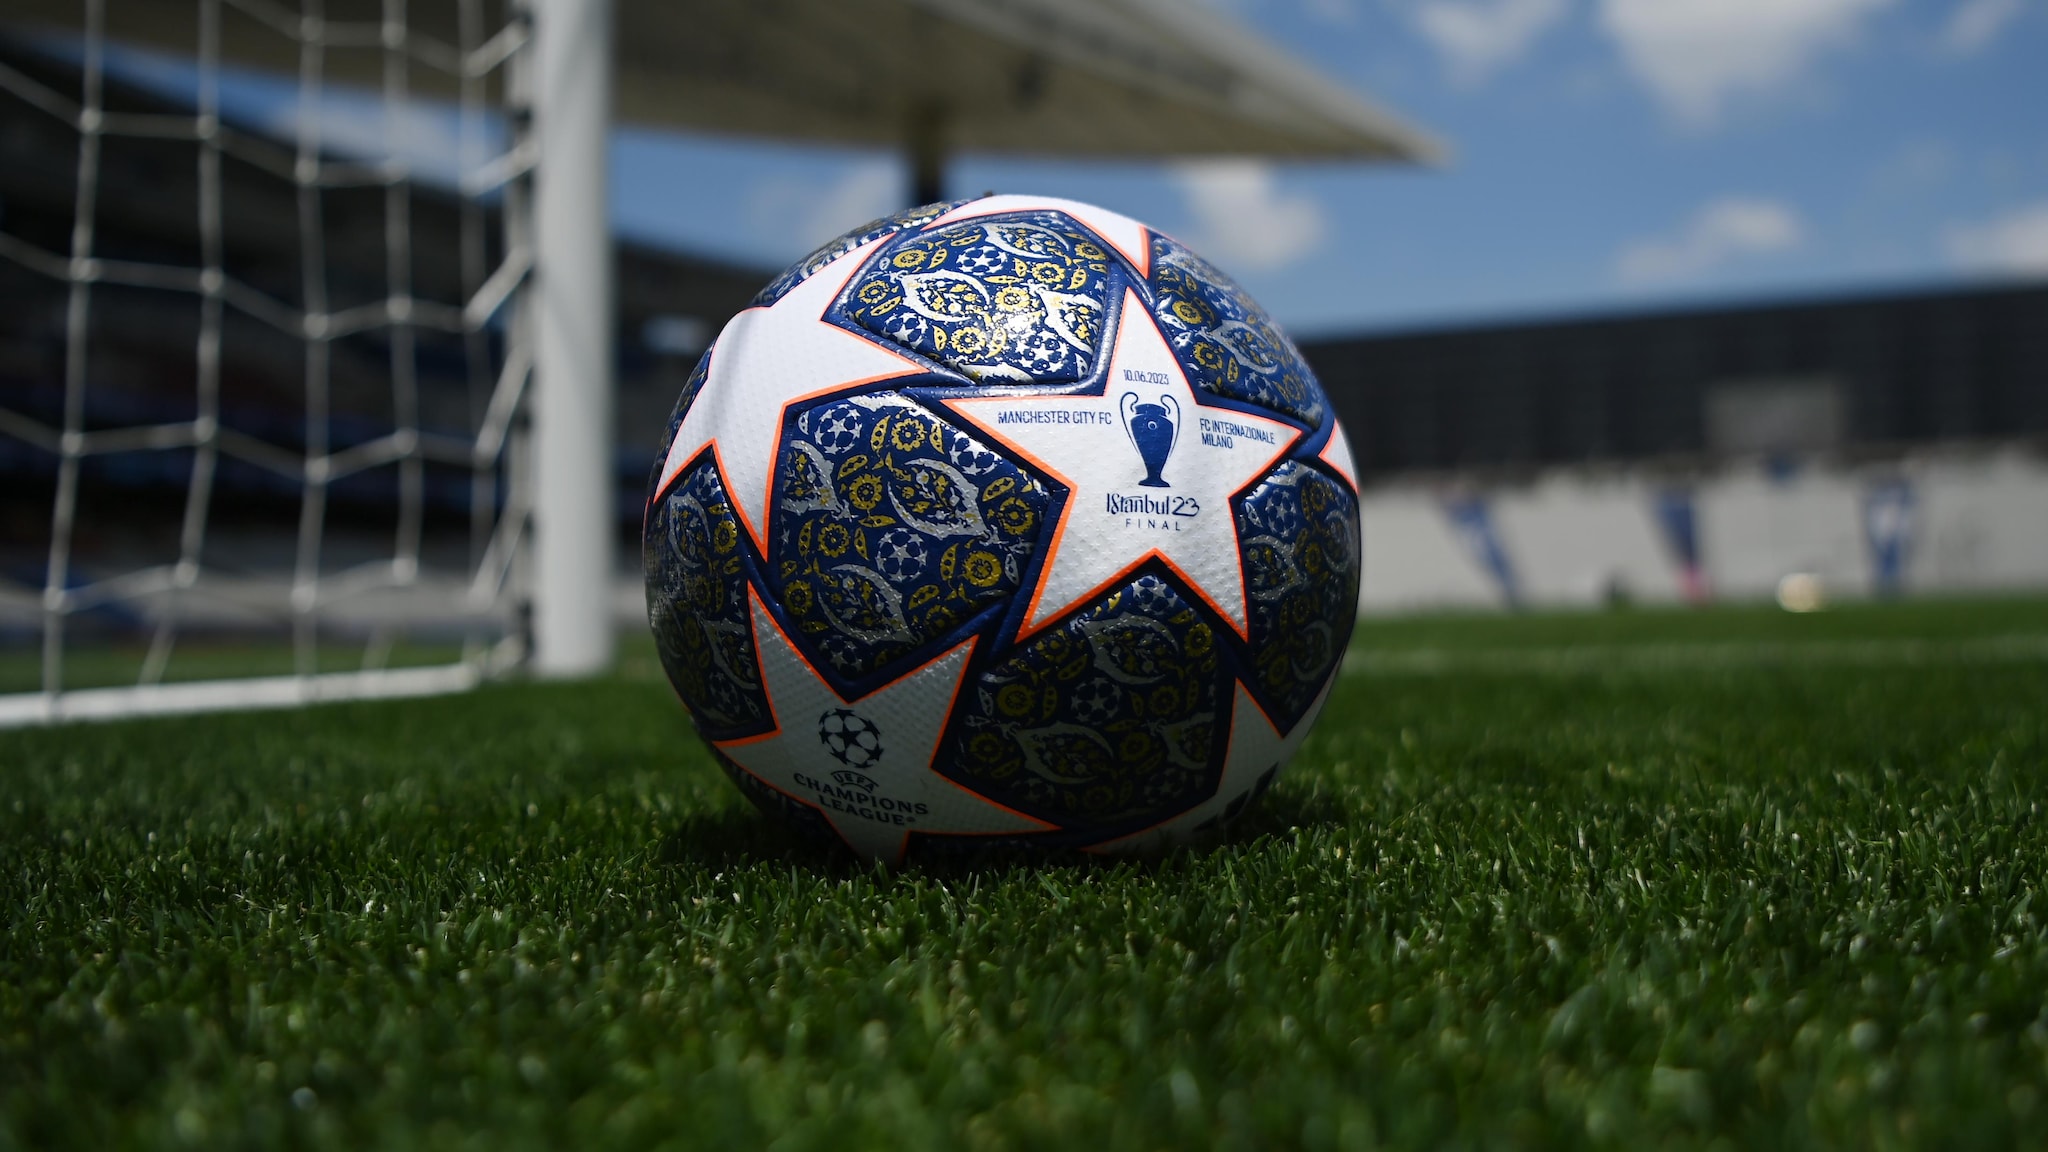 Official Champions League final match ball: All eyes on 2023 Starball, UEFA Champions League